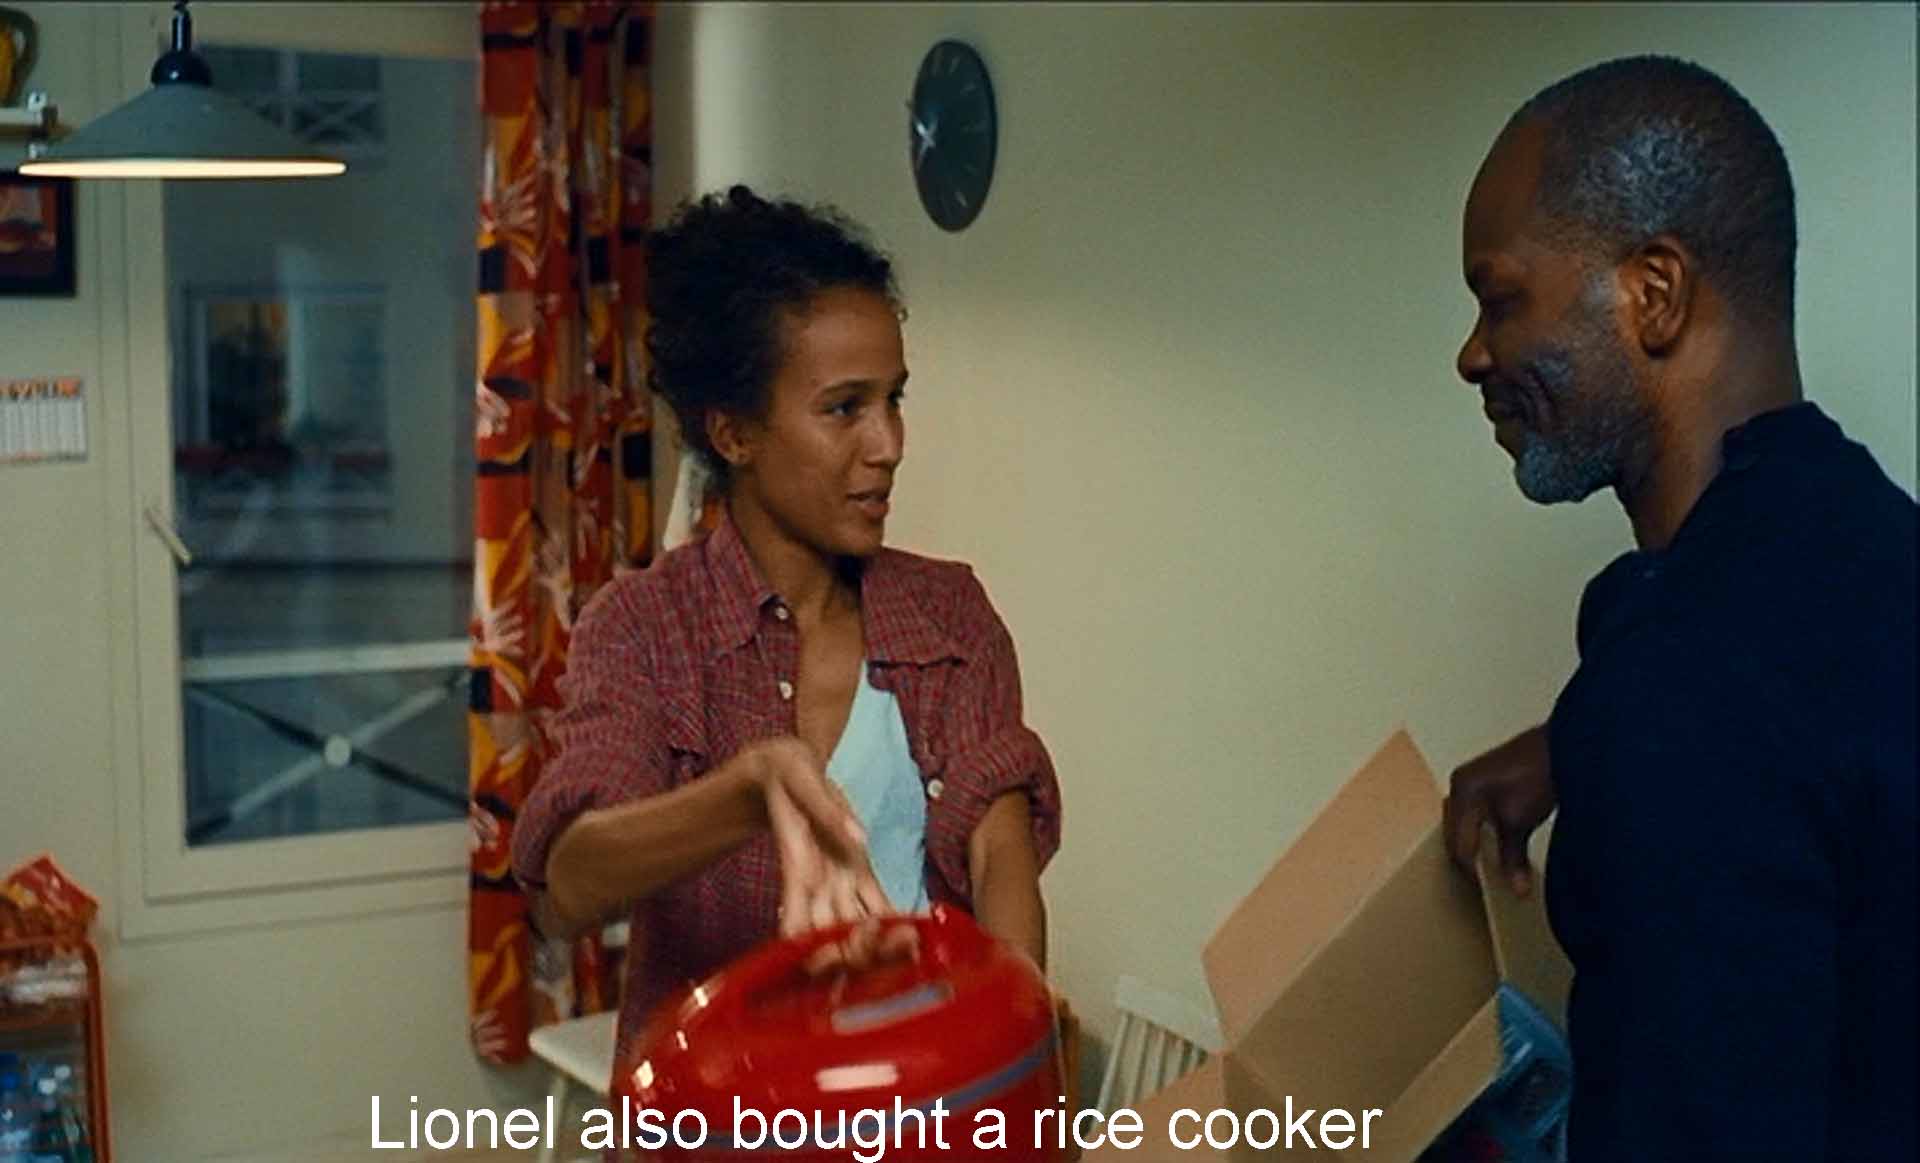 Lionel also bought a rice cooker